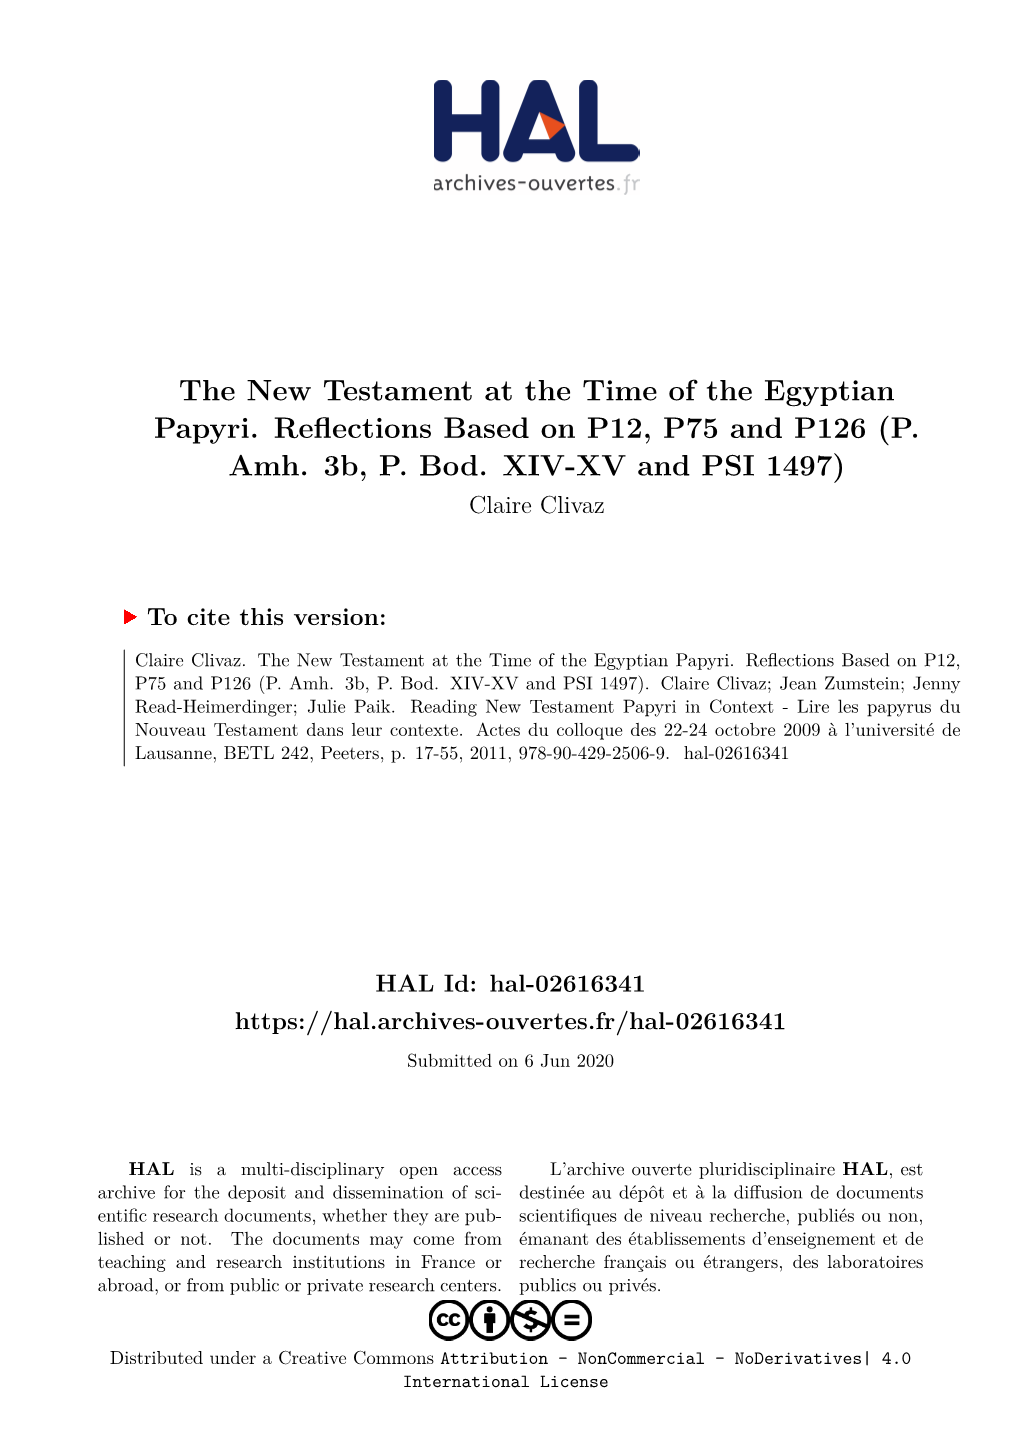 The New Testament at the Time of the Egyptian Papyri. Reflections Based on P12, P75 and P126 (P